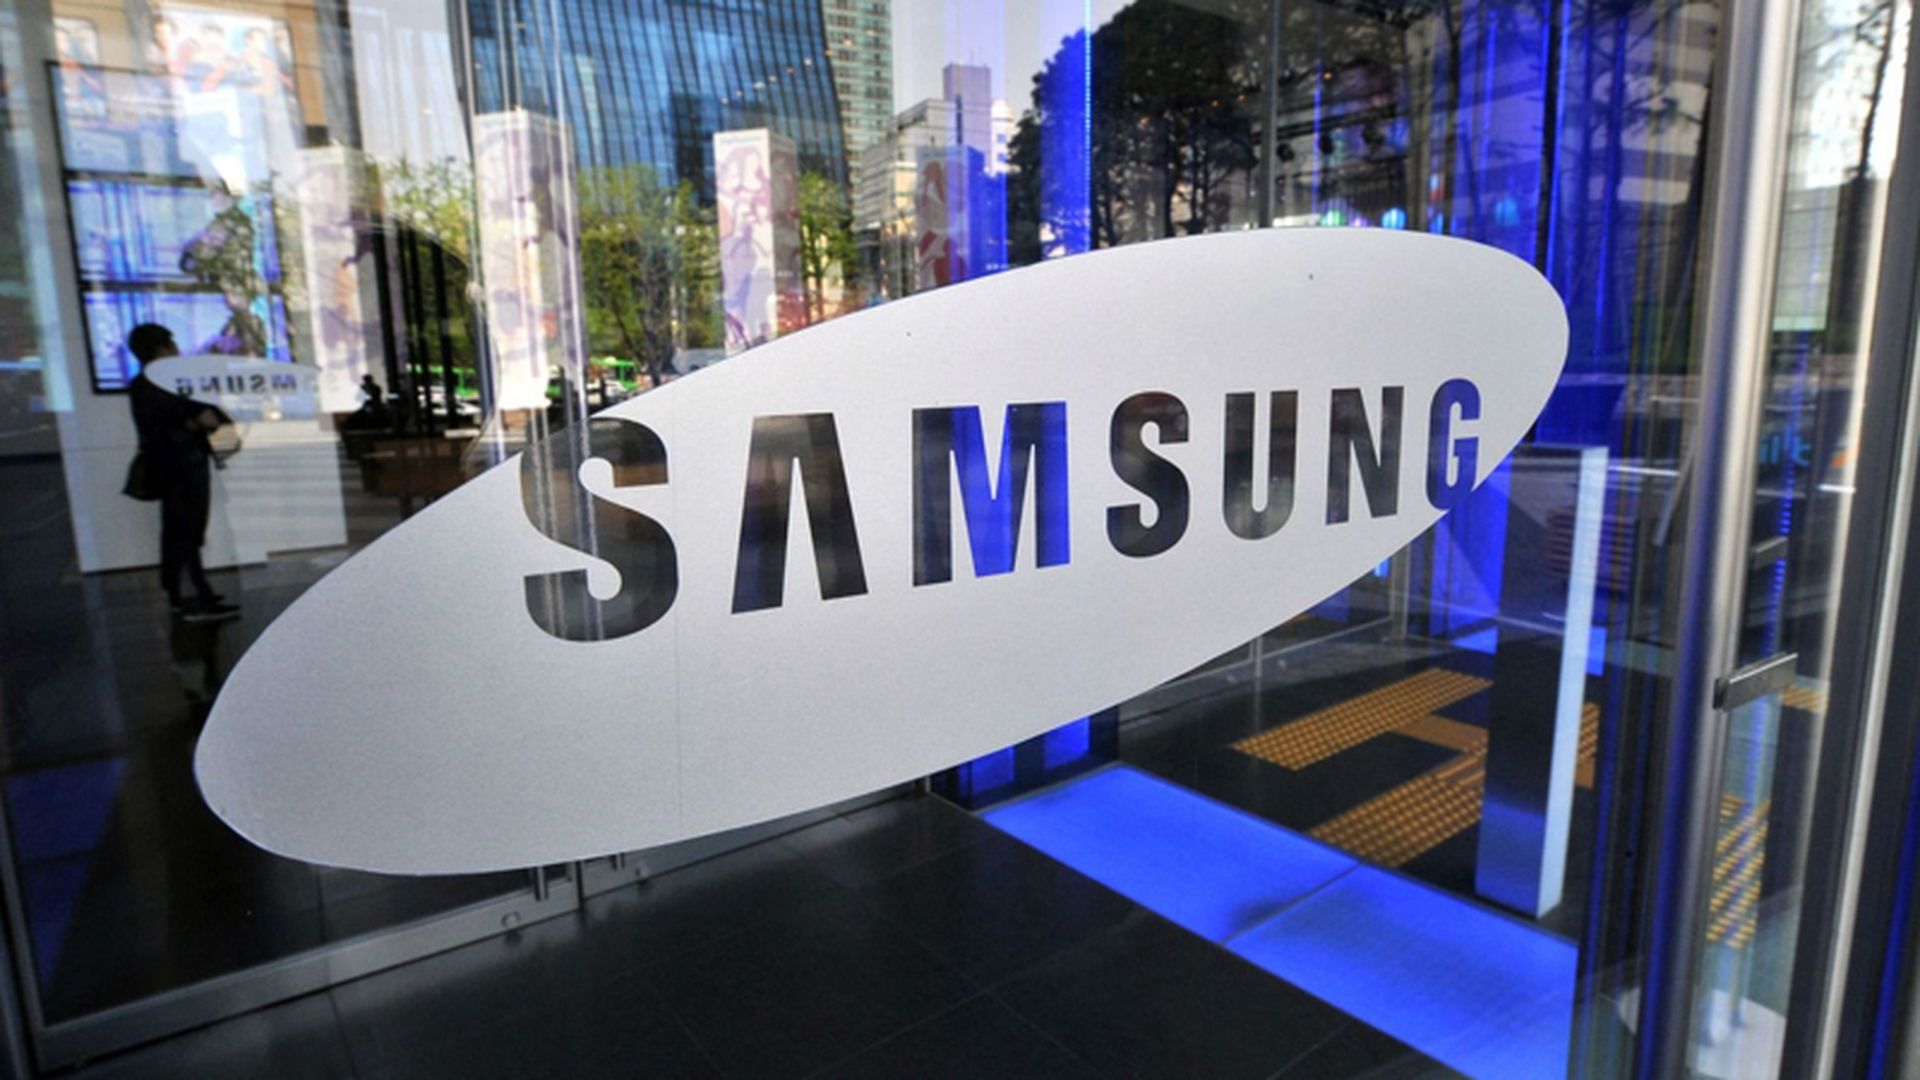 Today, we are covering the Samsung data breach that revealed customer info, and Samsung is working to solve it with an independent cybersecurity firm.